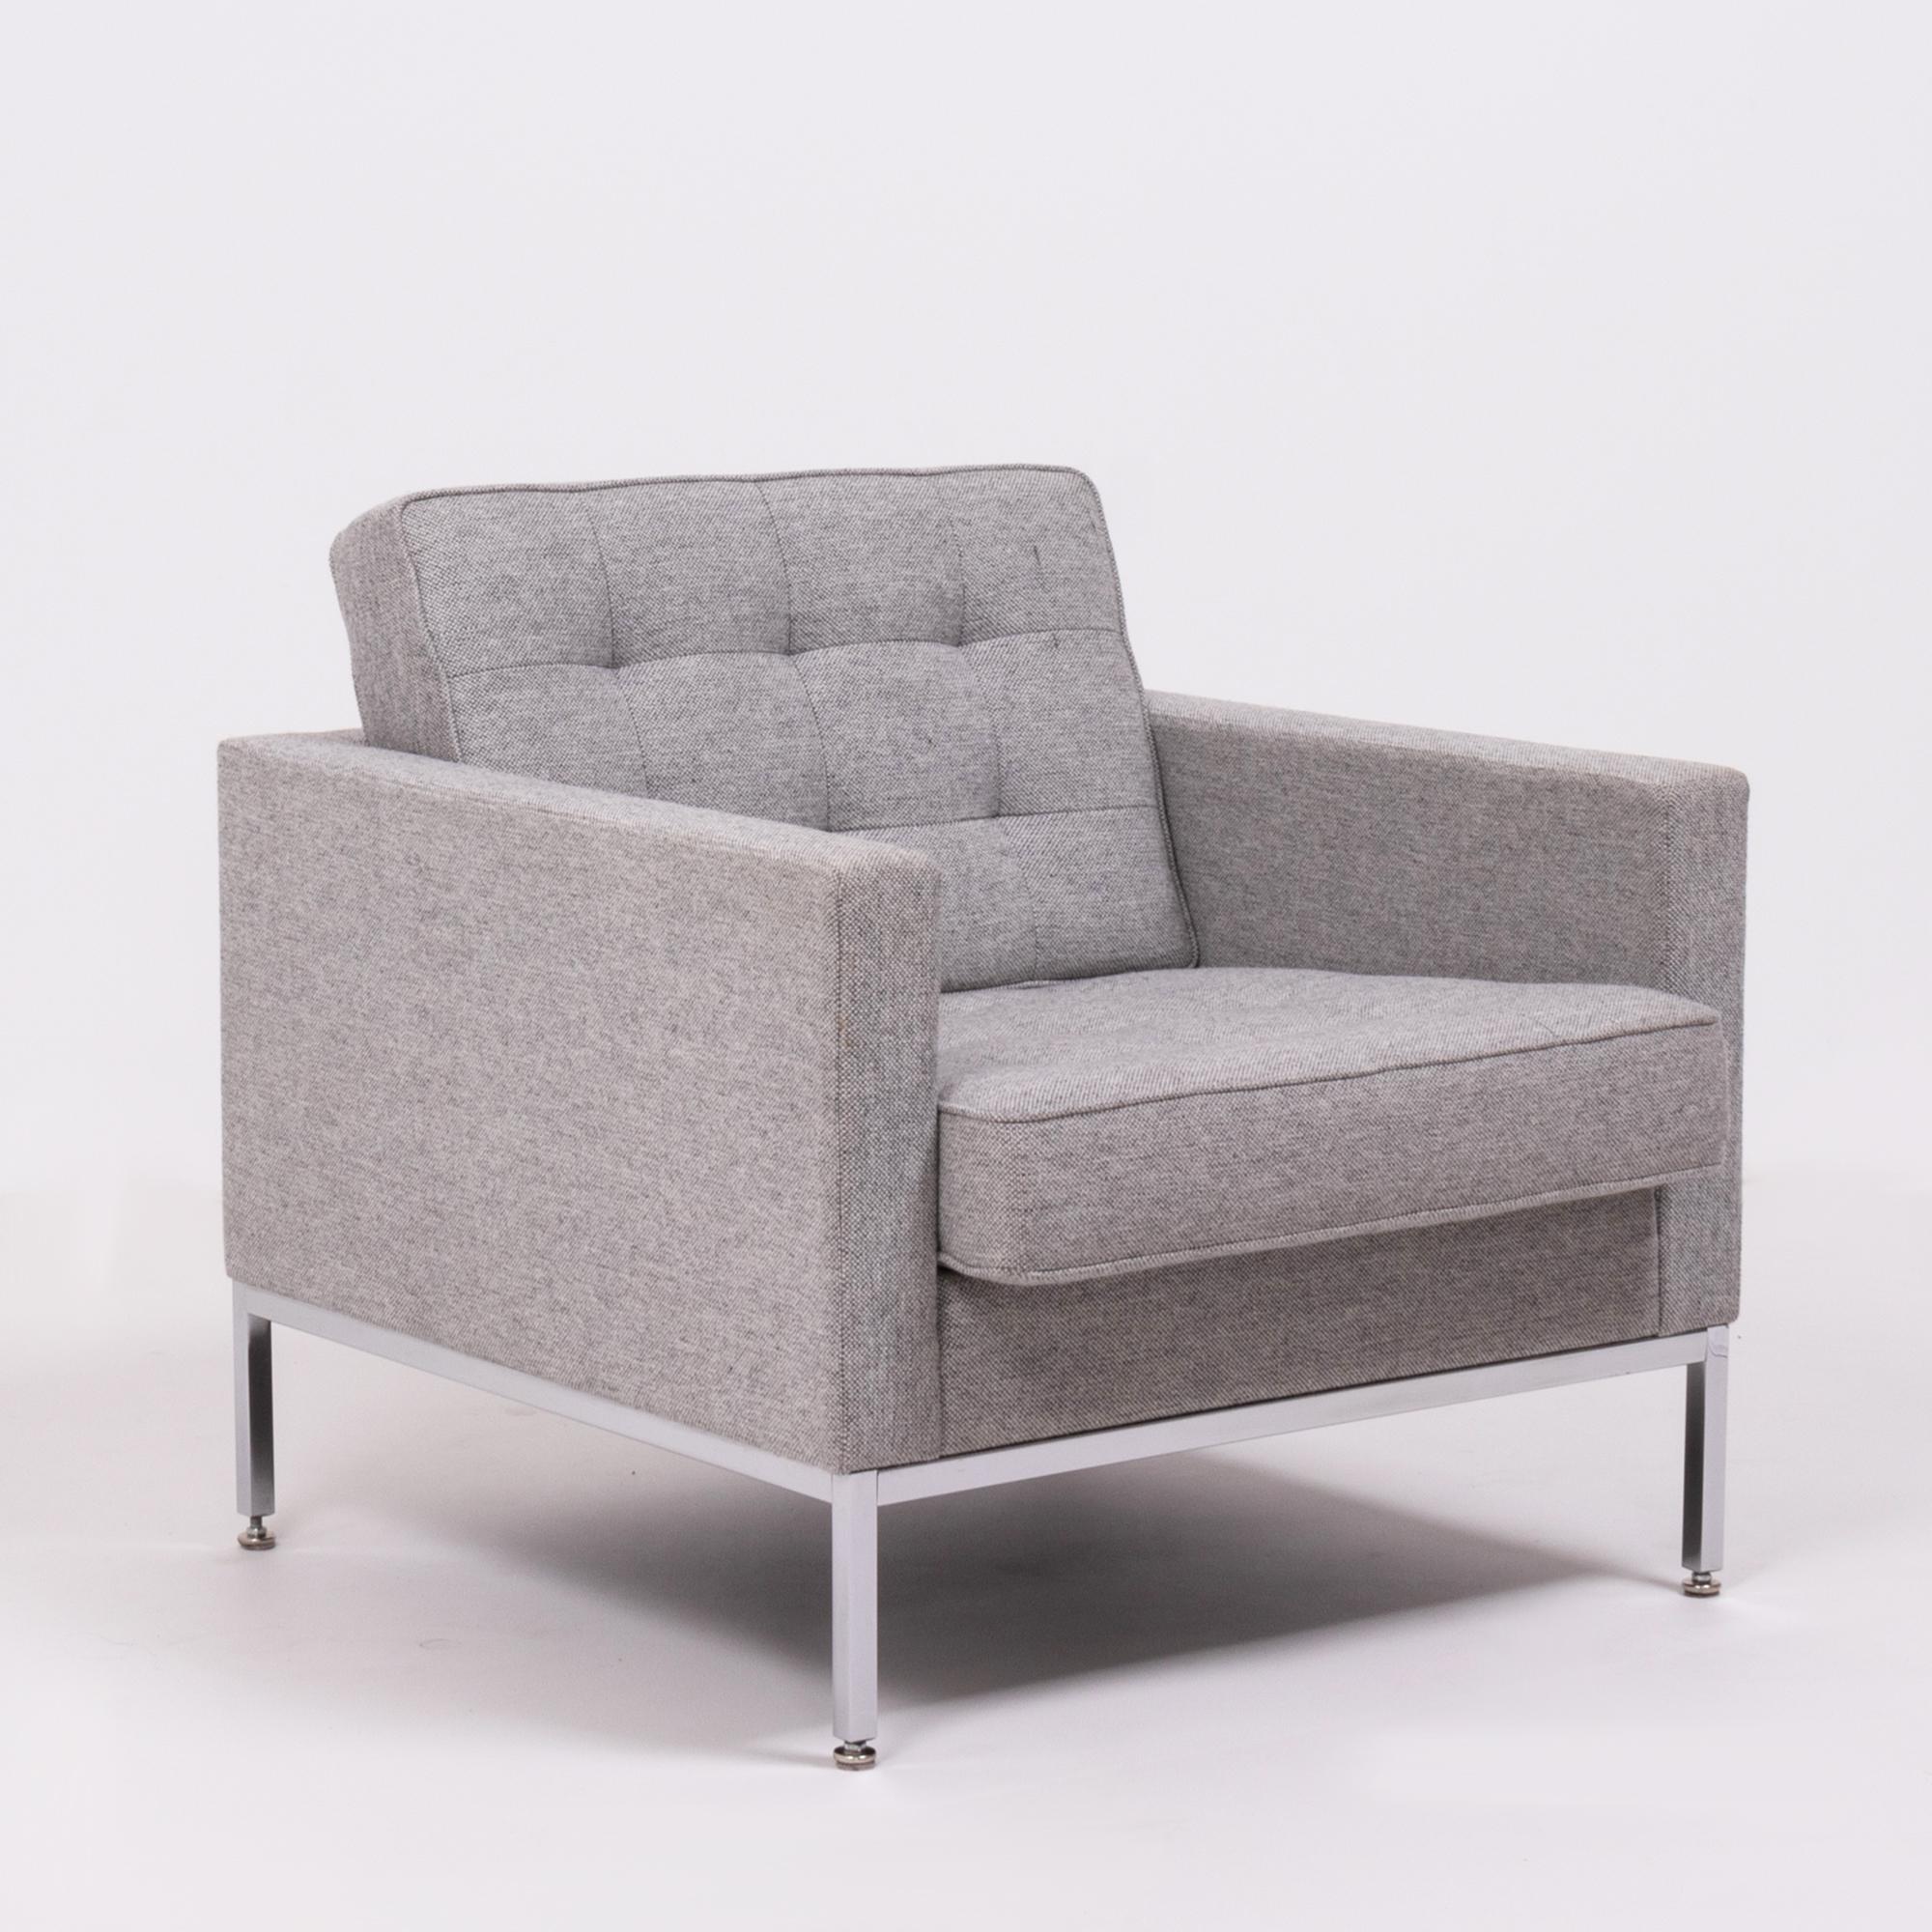 A rare, original “Florence Knoll” lounge chair from the world renown furniture house of Knoll Studio, dressed in a sublime, tactile woven-wool fabric, and with polished chrome framework.

Knoll Studio pieces are the epitome of contemporary